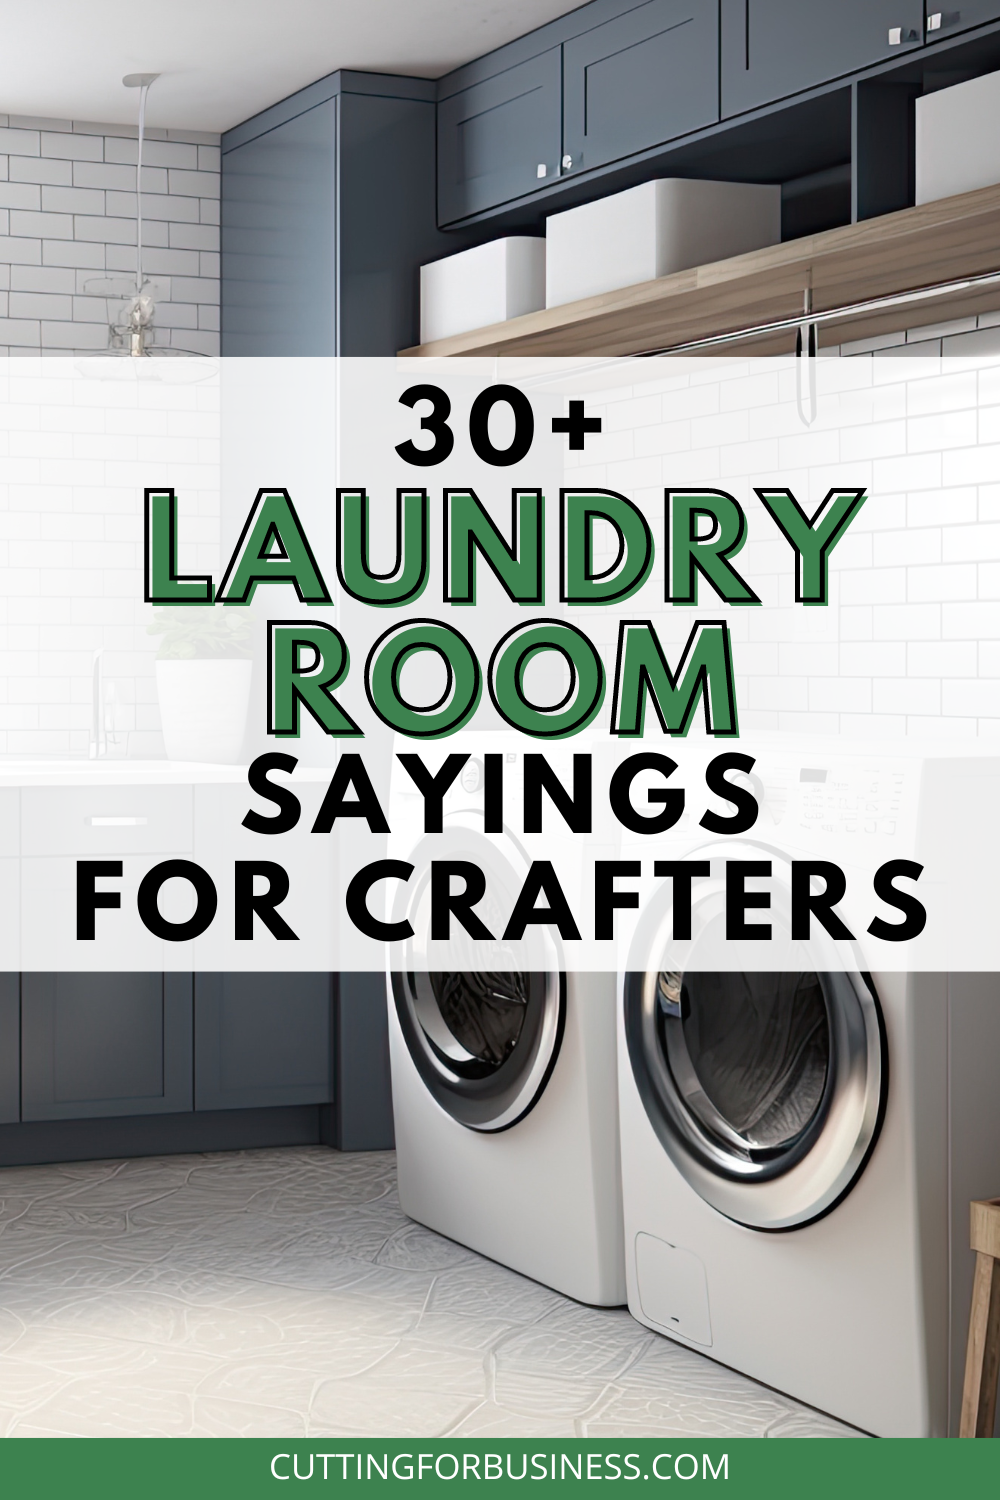 30+ Laundry Room Sayings for Crafters - cuttingforbusiness.com.